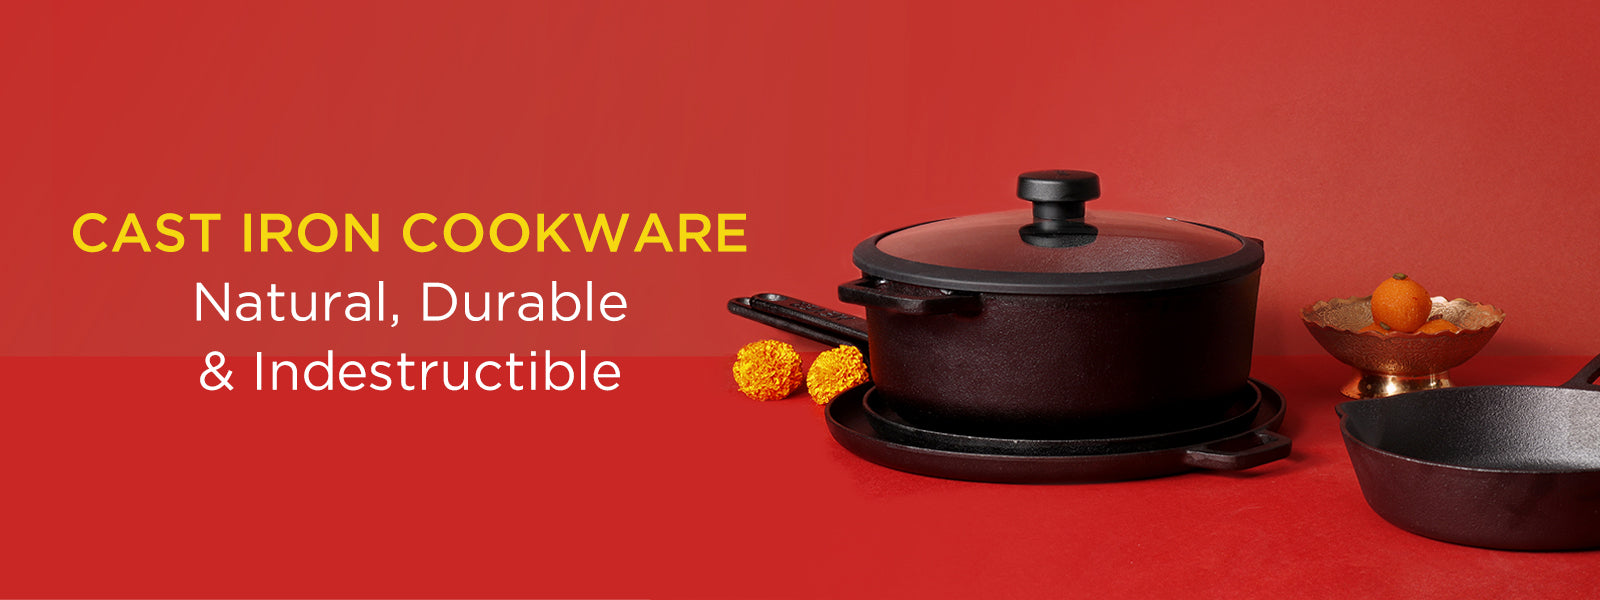 The Best Cast Iron Cookware in India of 2021